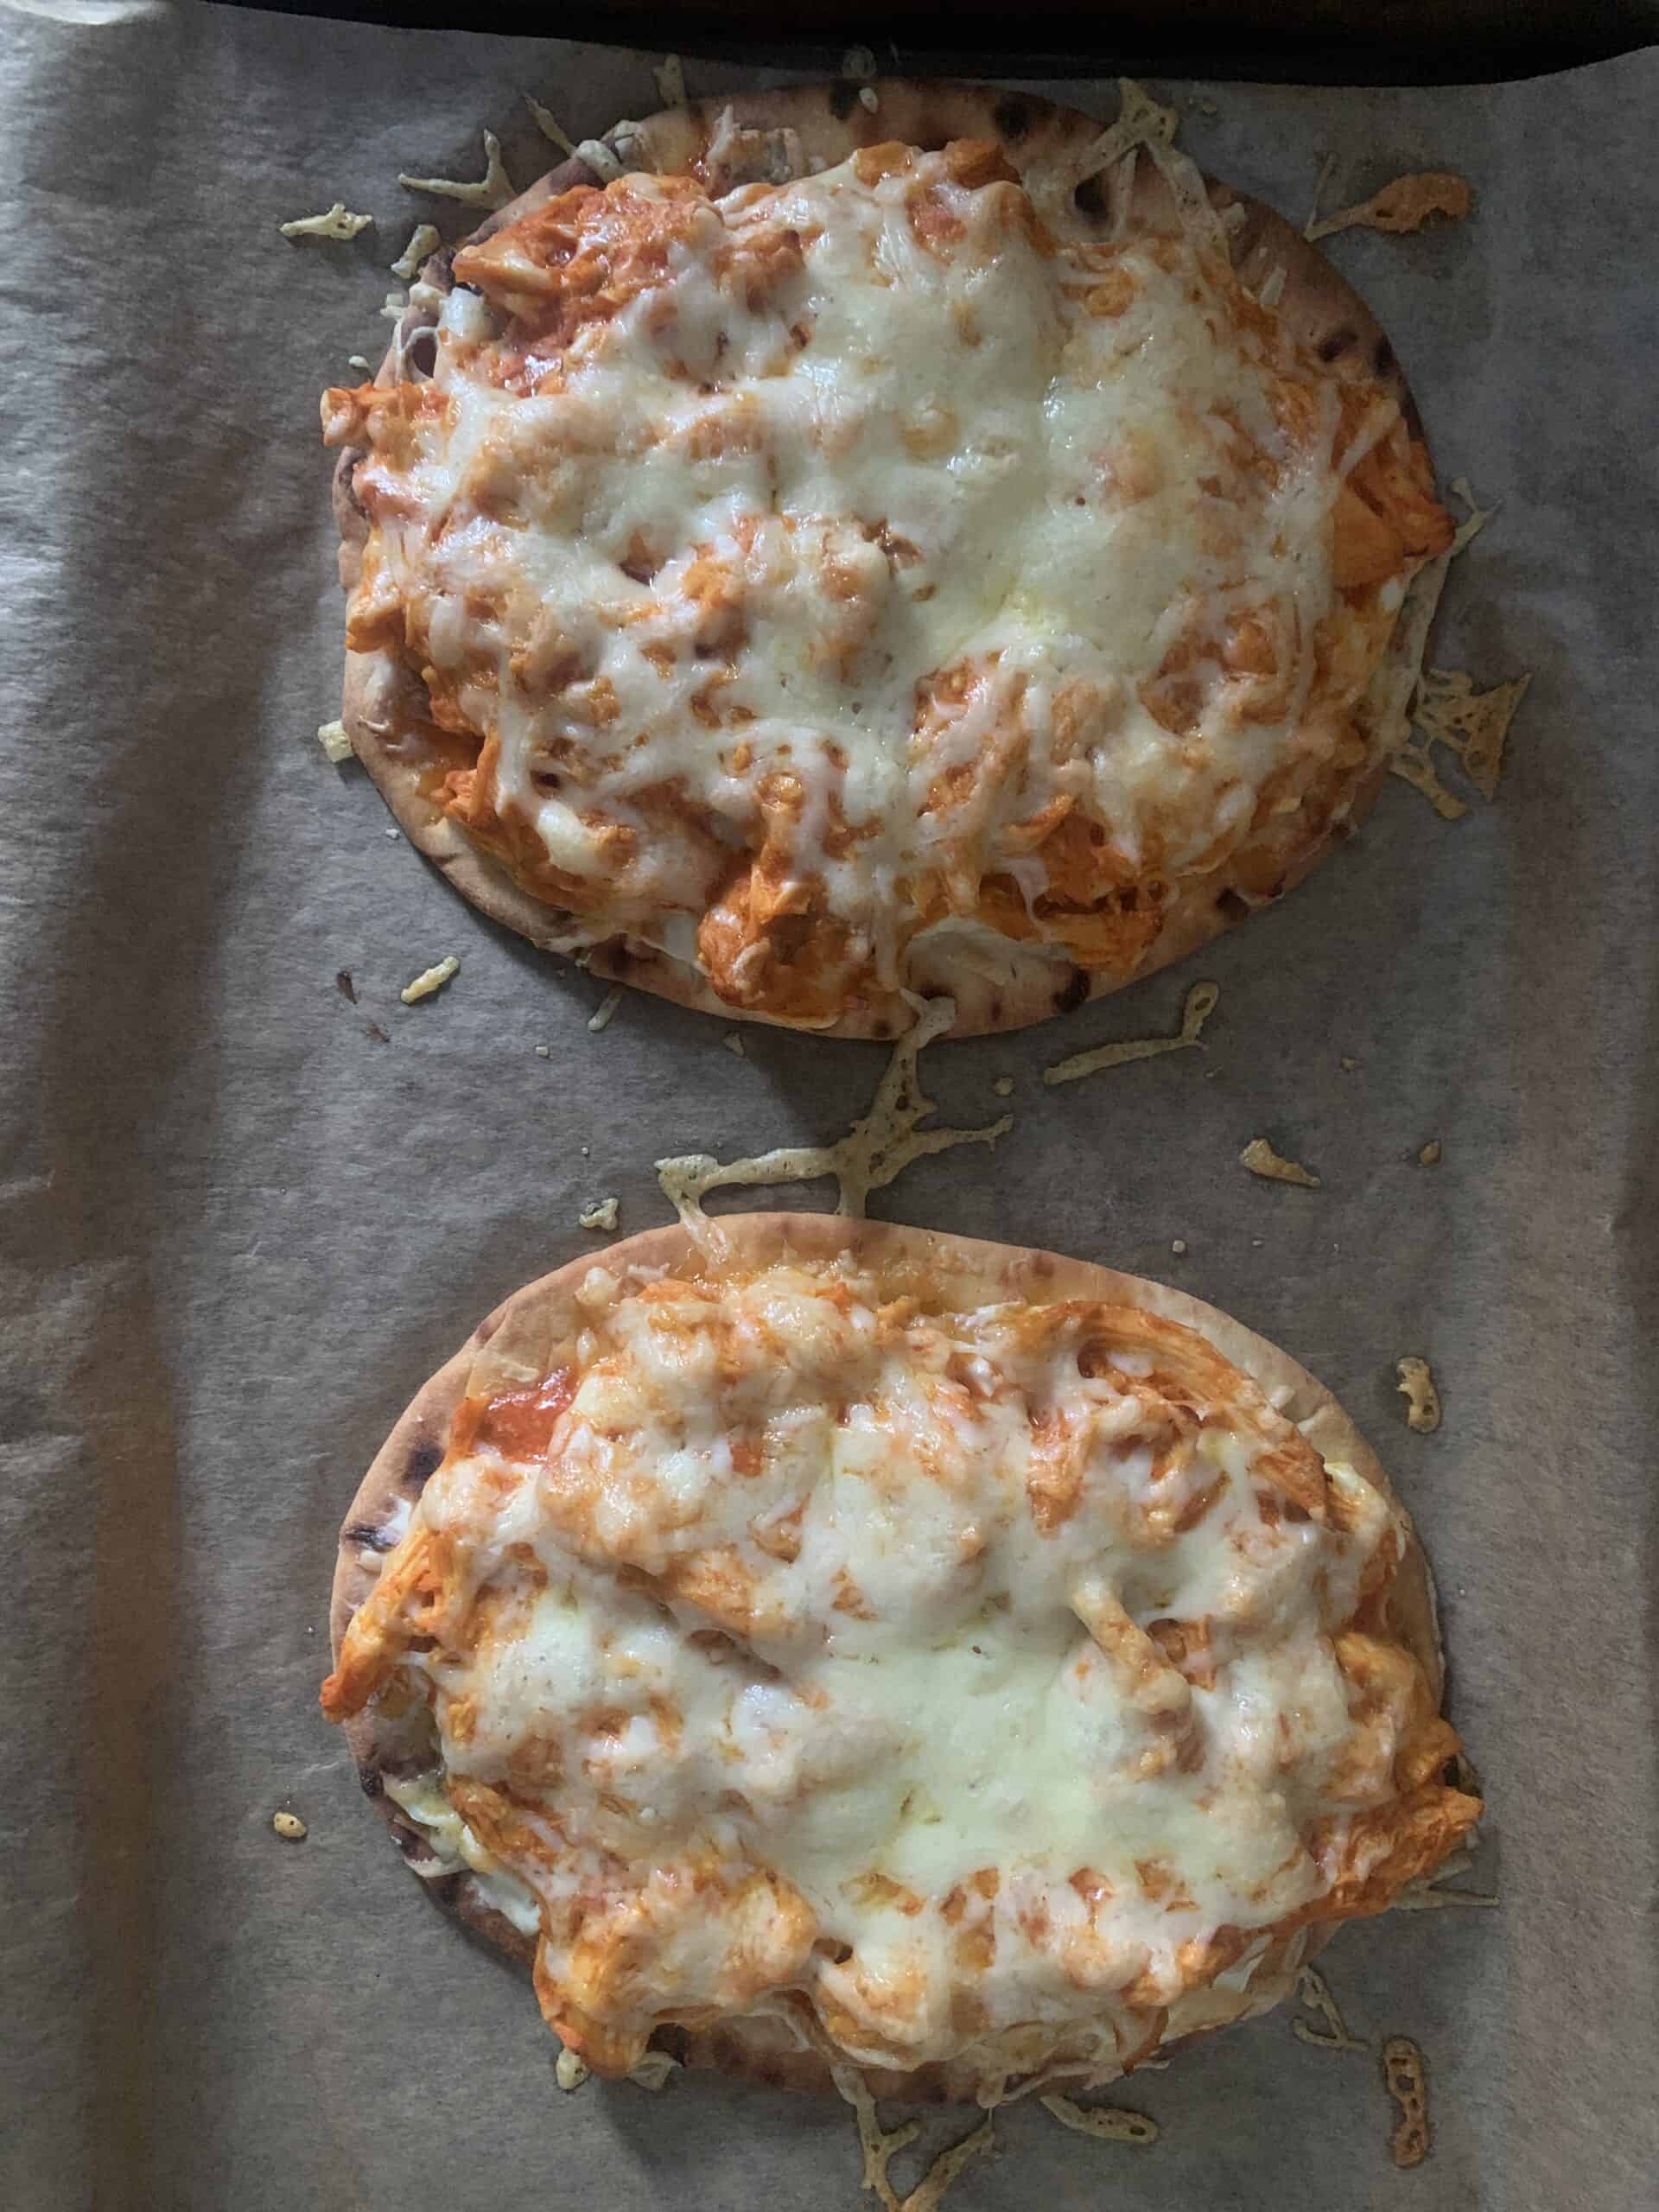 Two flatbreads with chicken and melted cheese